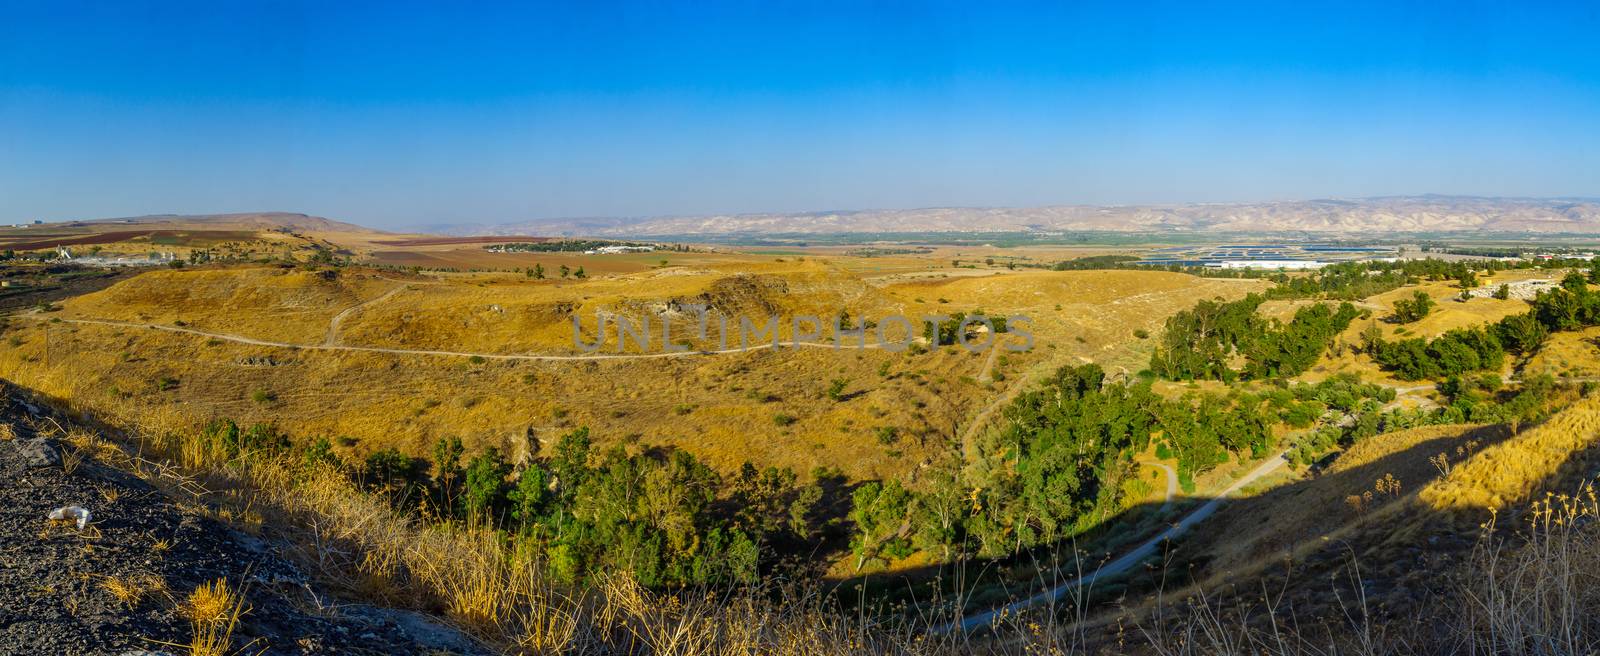 Panoramic view of the Jordan River valley and the Valley of Springs (Emek Hamaayanot). Northern Israel